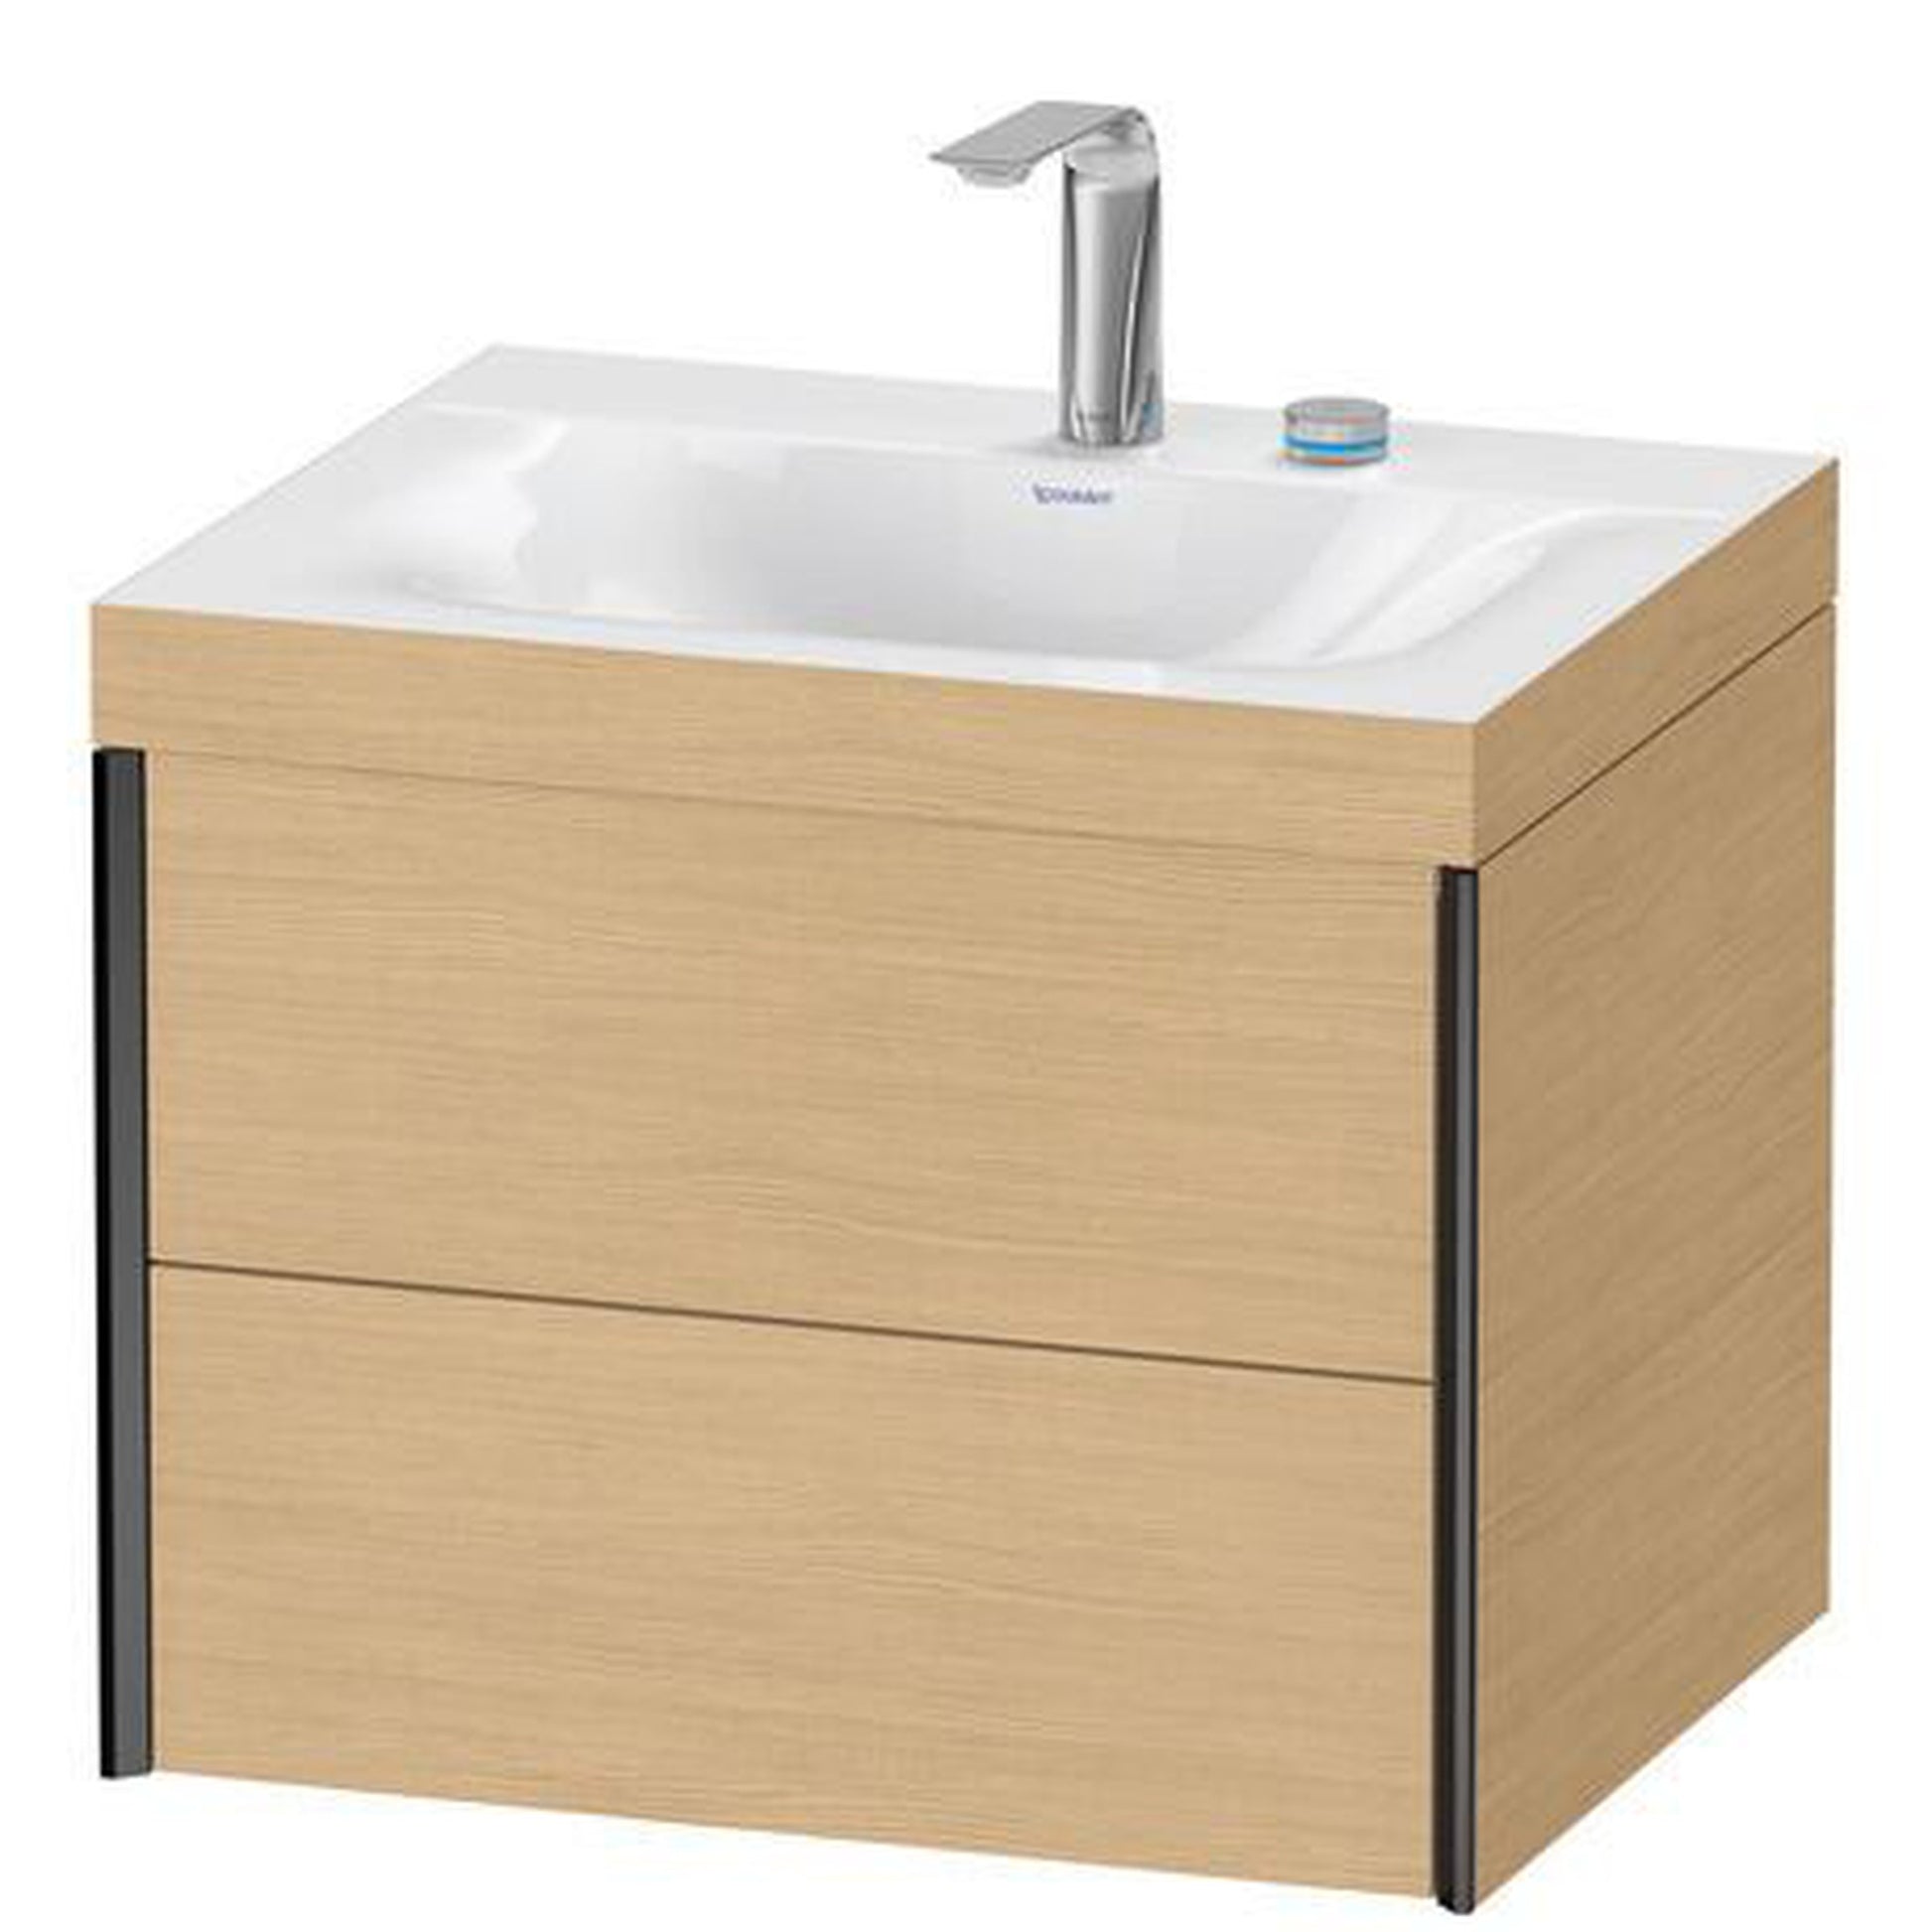 Duravit Xviu 24" x 20" x 19" Two Drawer C-Bonded Wall-Mount Vanity Kit With Two Tap Holes, Natural Oak (XV4614EB230C)